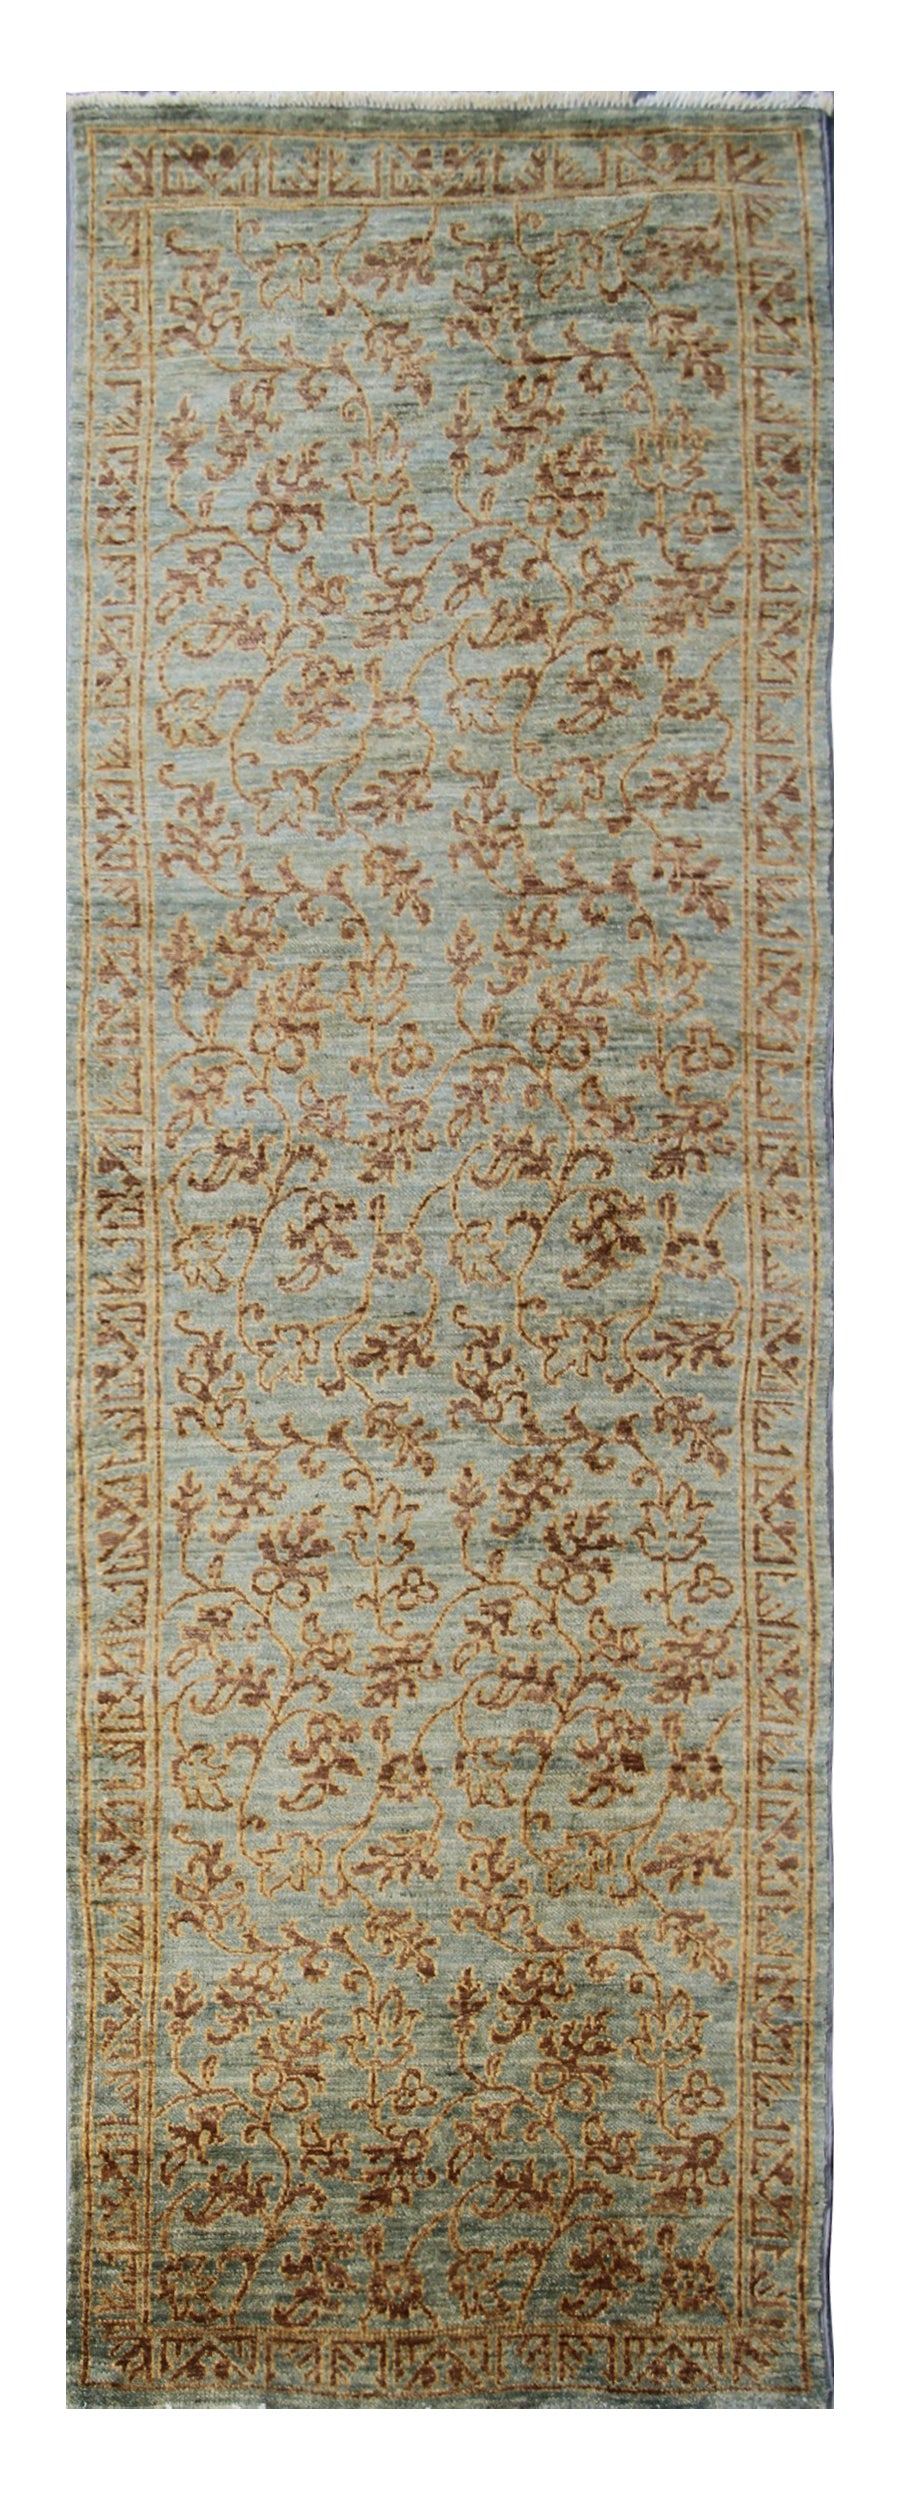 10'x3'Grey Blue Gold Hand-Knotted Floral design Runner Area Rug.